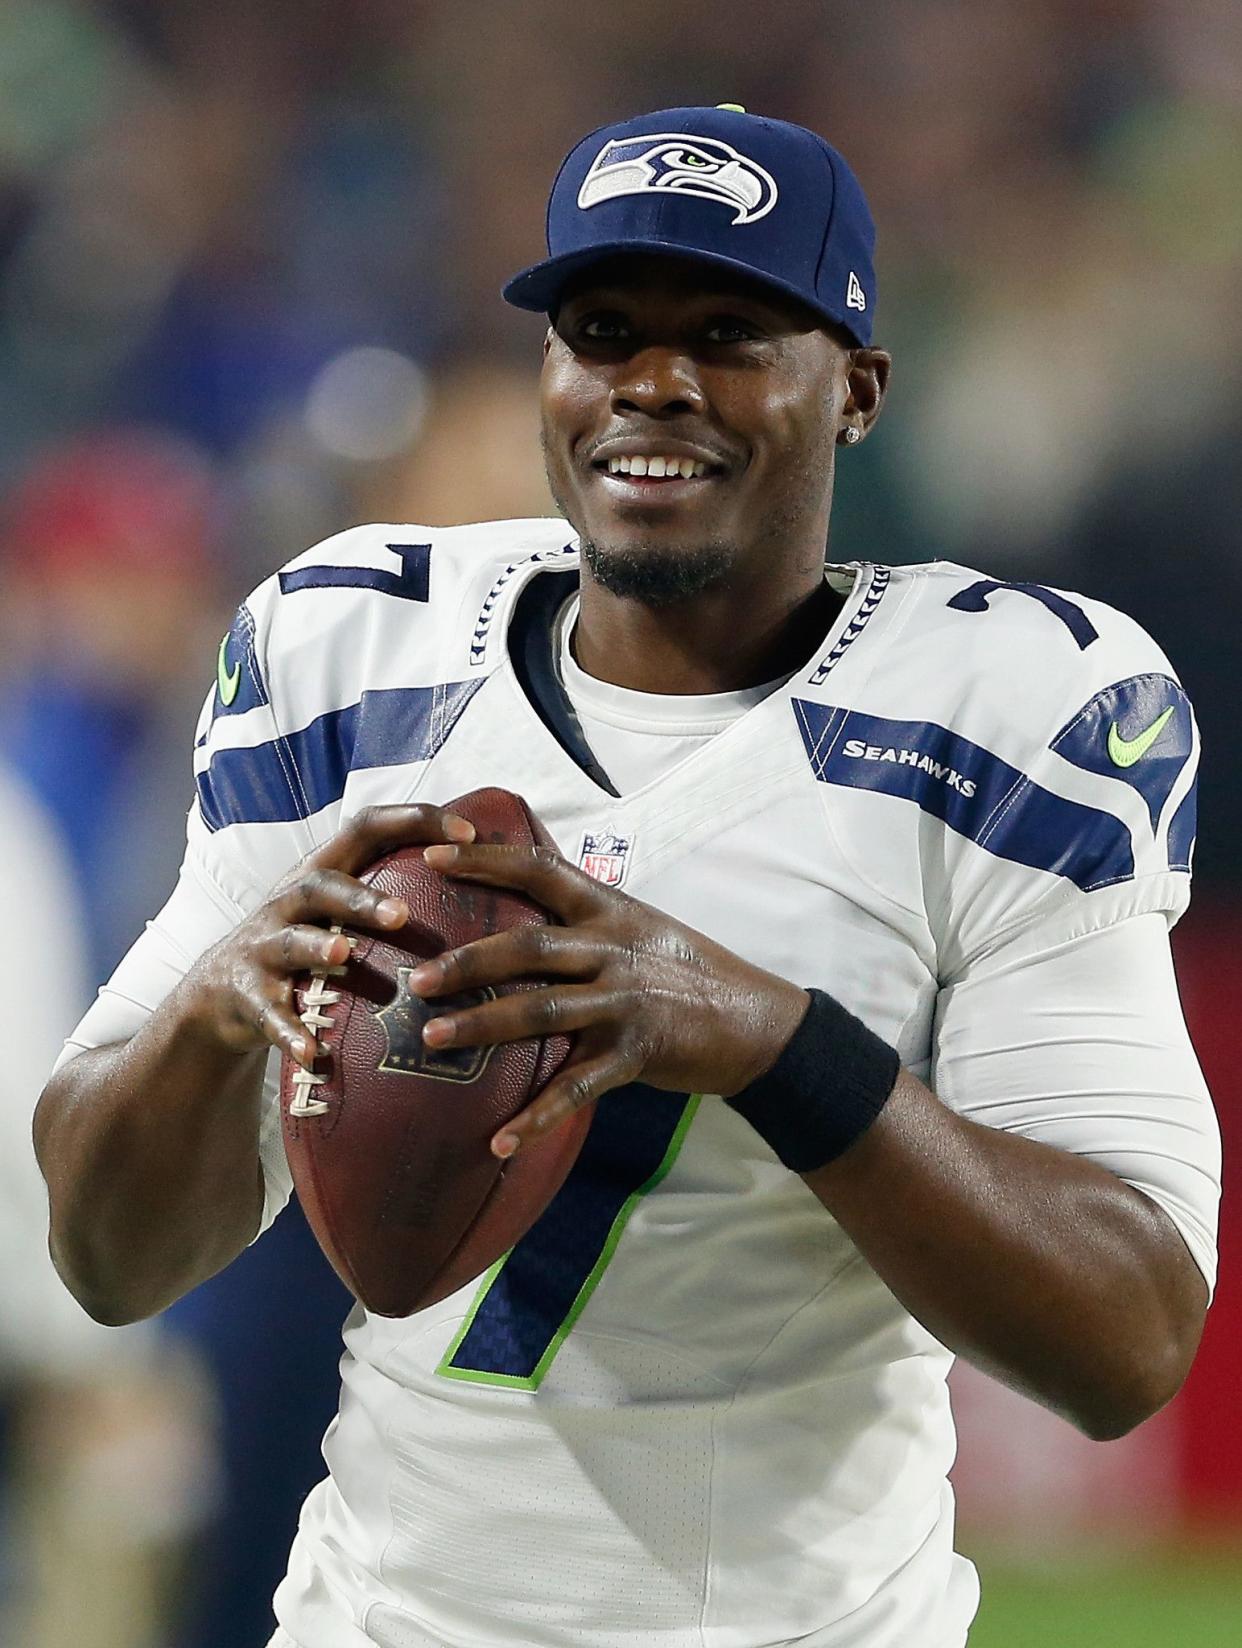 Former NFL quarterback Tarvaris Jackson, who previously played for the Seattle Seahawks, Buffalo Bill and Minnesota Vikings, died in a car accident on Sunday, April 12, 2020. He was 36.